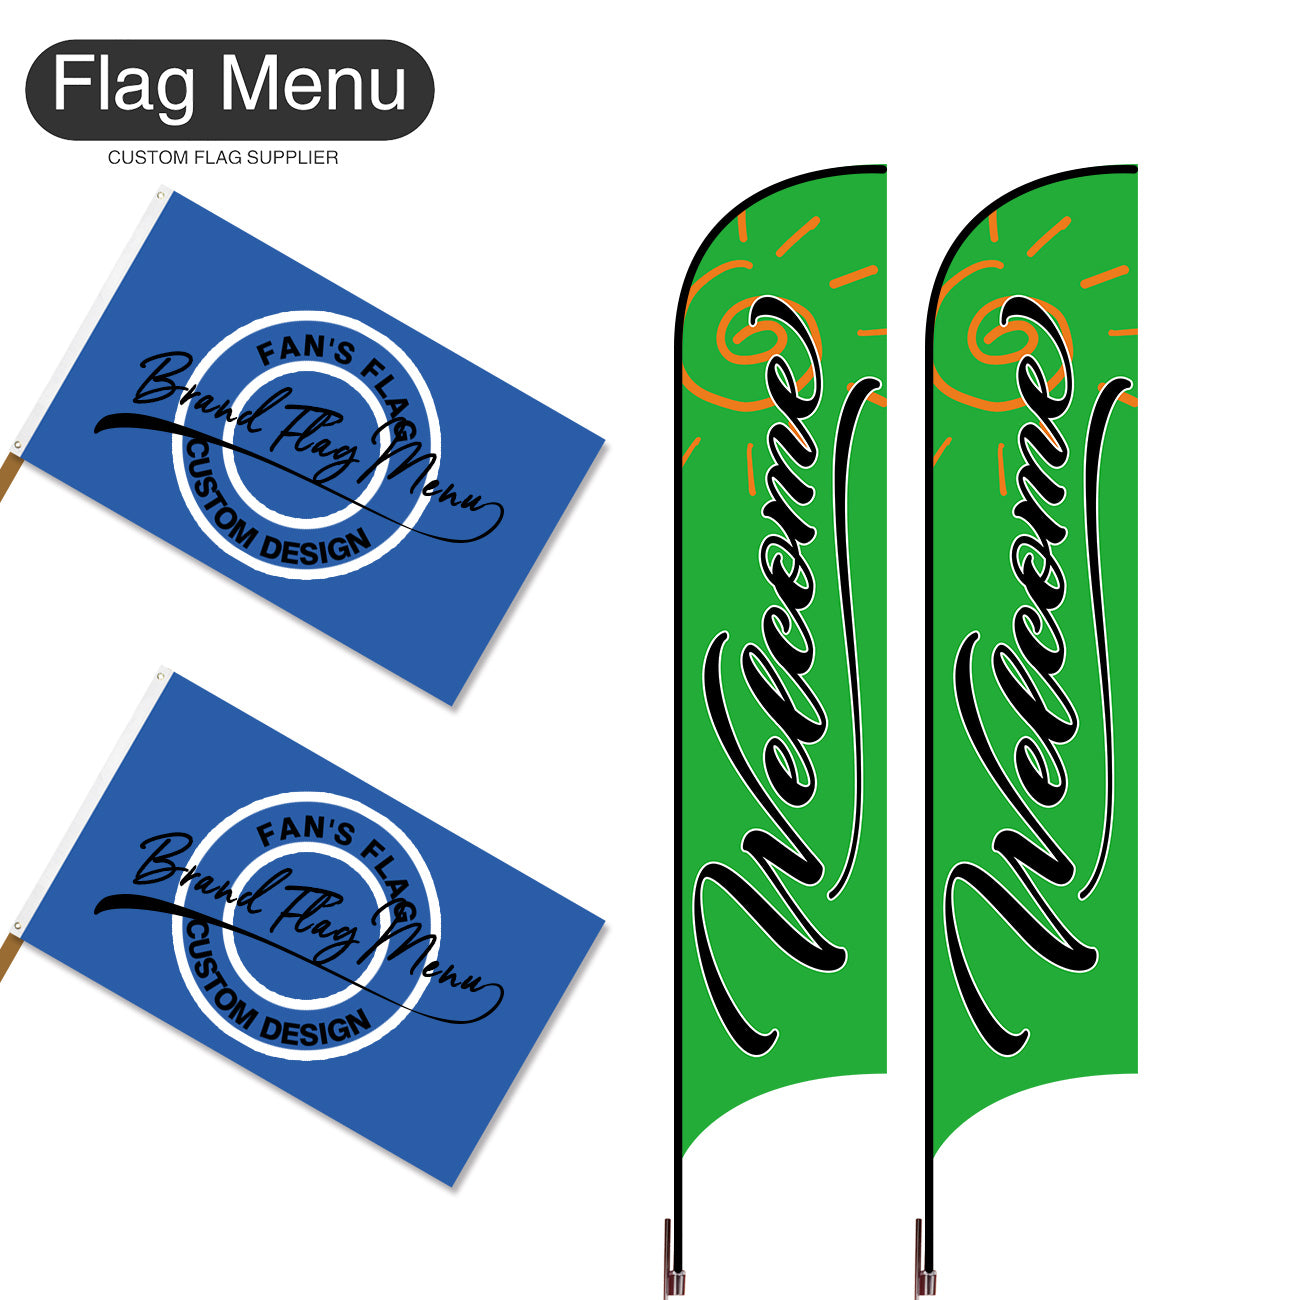 Outdoor Advertising Set - D-Green C-S - Feather Flag -Double Sided & 3'x5' Regular Flag -Single Sided-Cross & Water Bag-Flag Menu